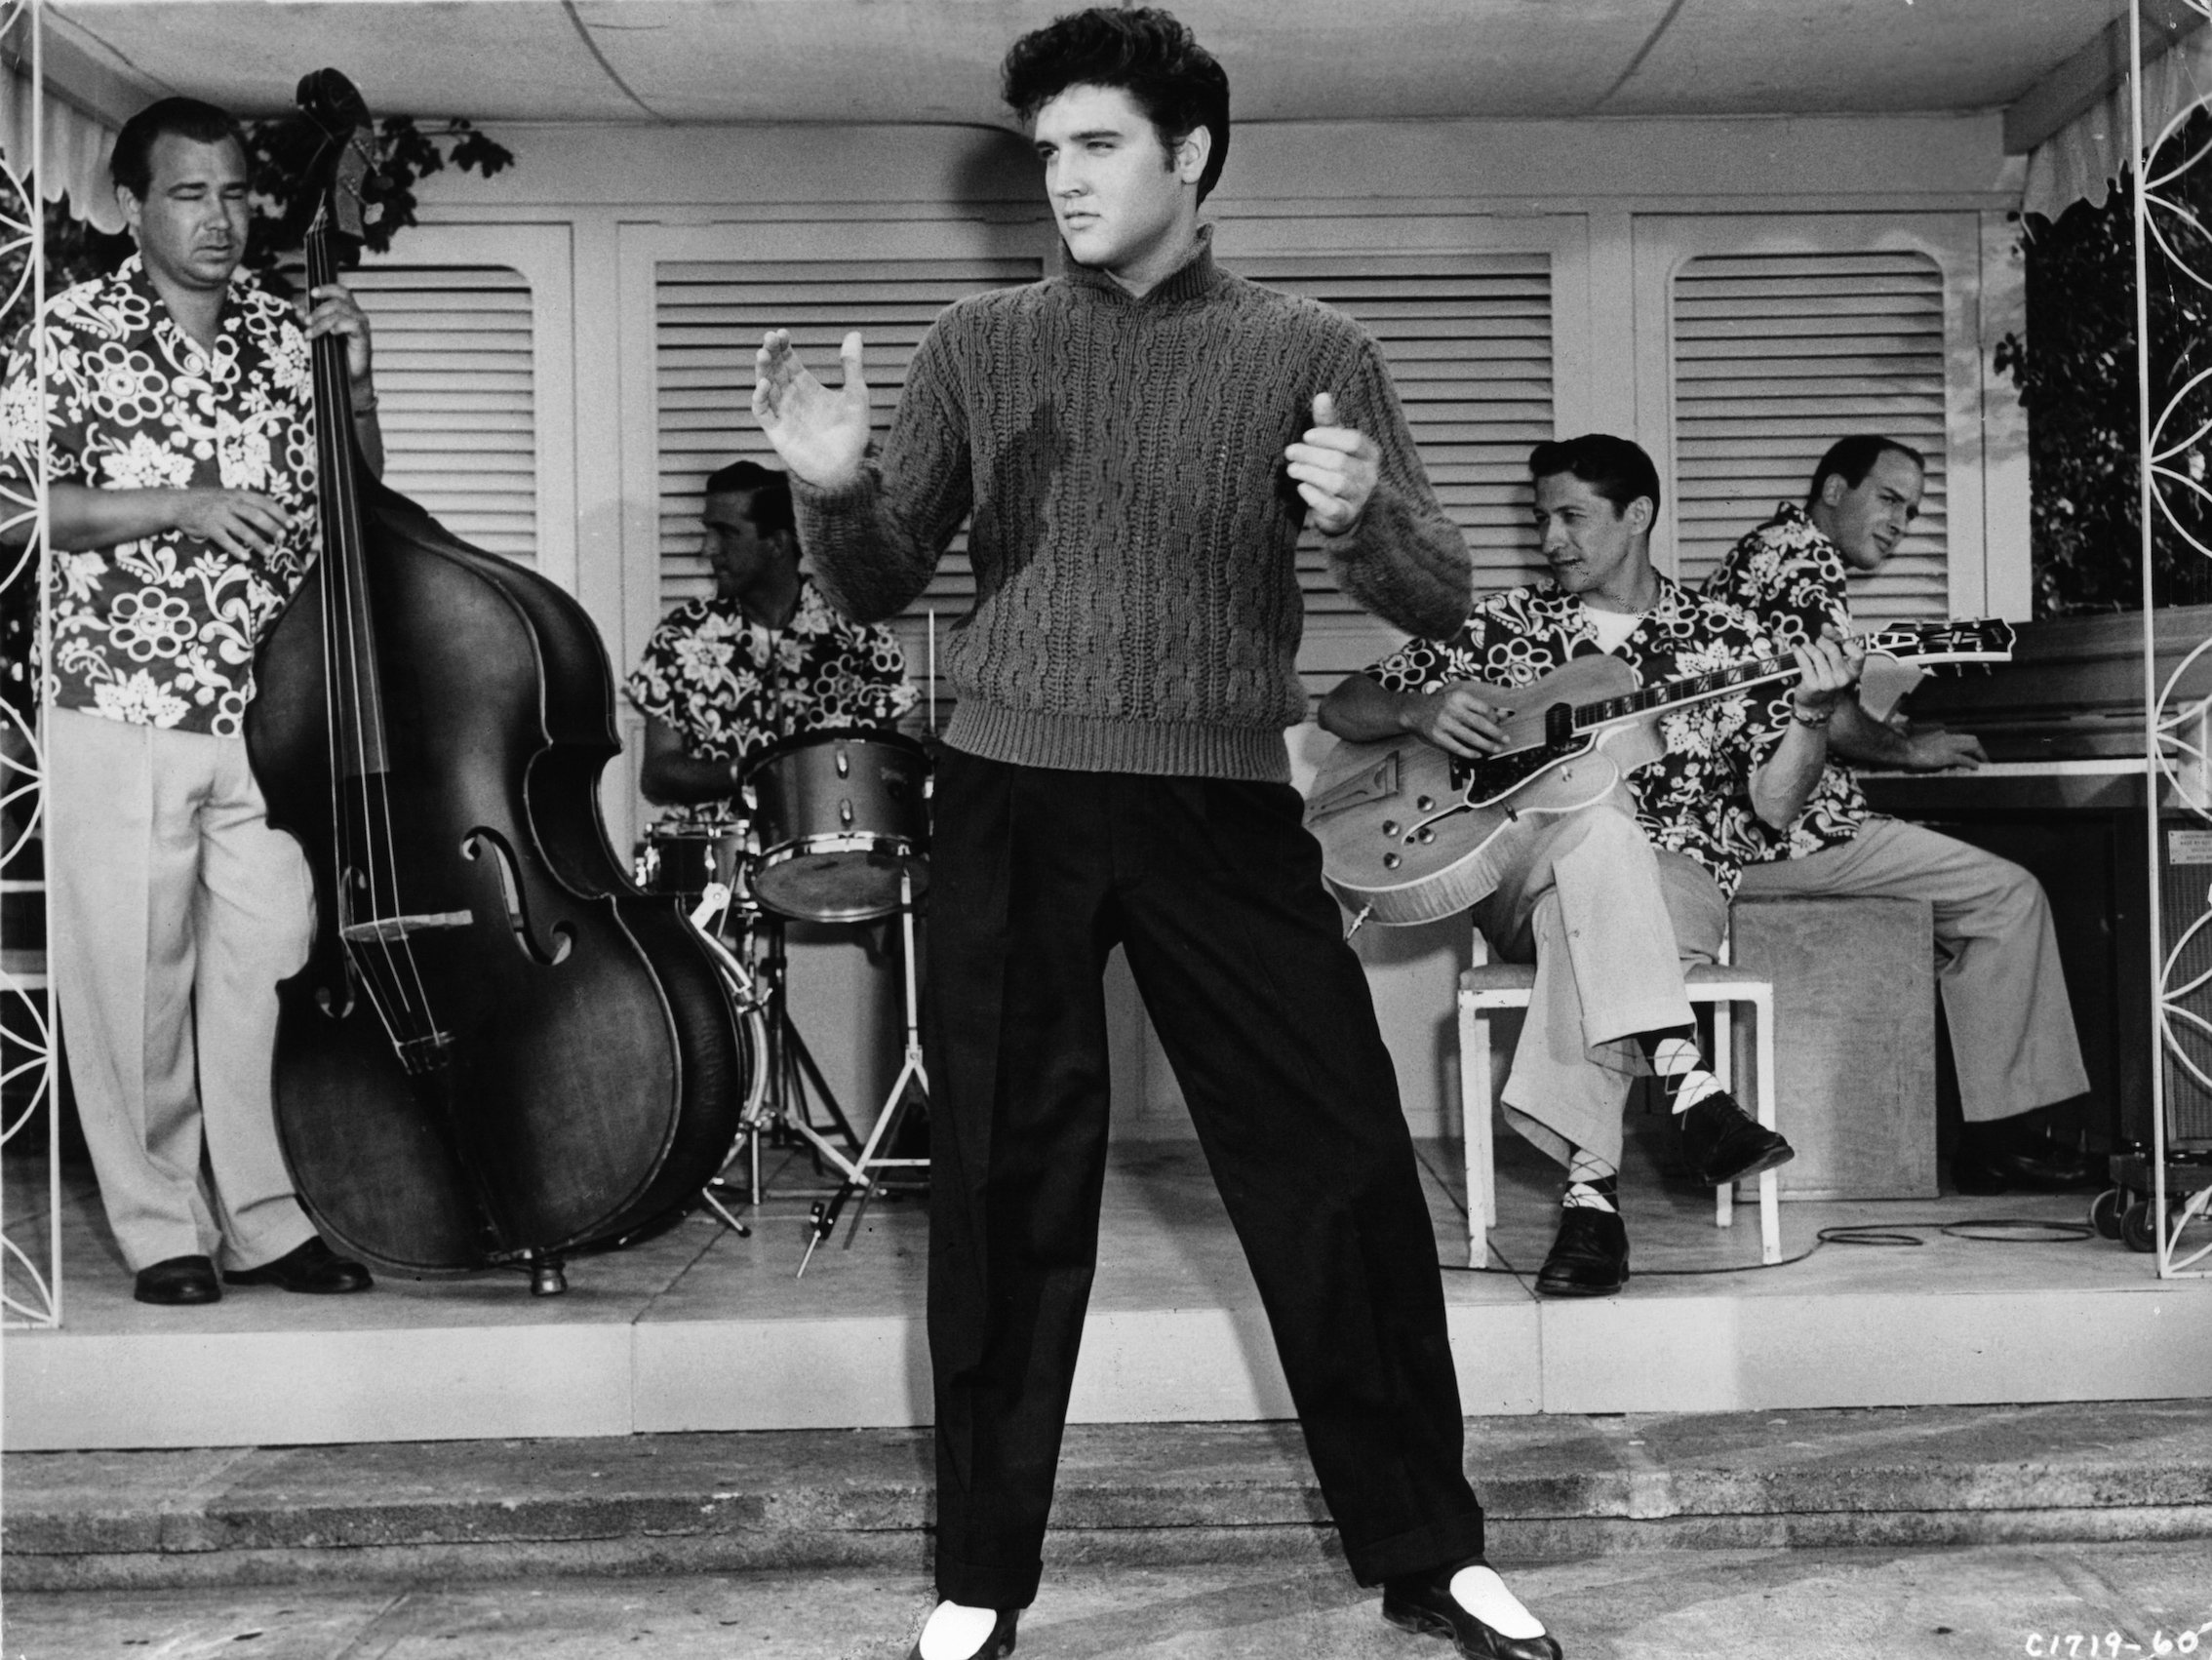 Elvis Presley performing in a scene from the movie 'Jailhouse Rock'